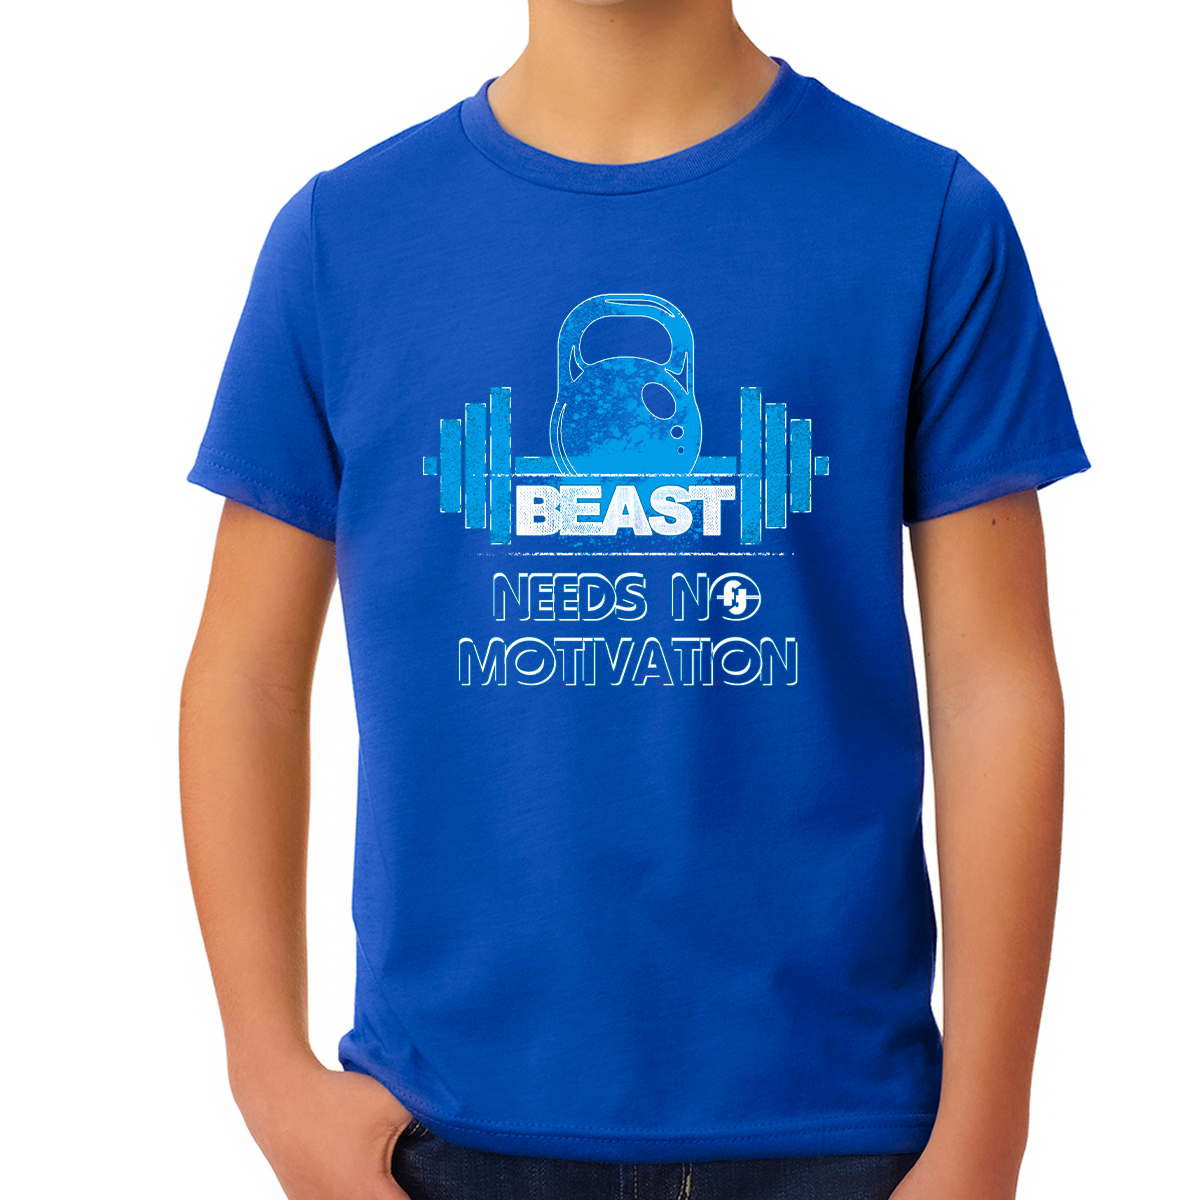 Graphic Tees for BOYS YOUTH - Beast Needs No Motivation Graphic Shirts for KIDS - Cool BOYS Shirts